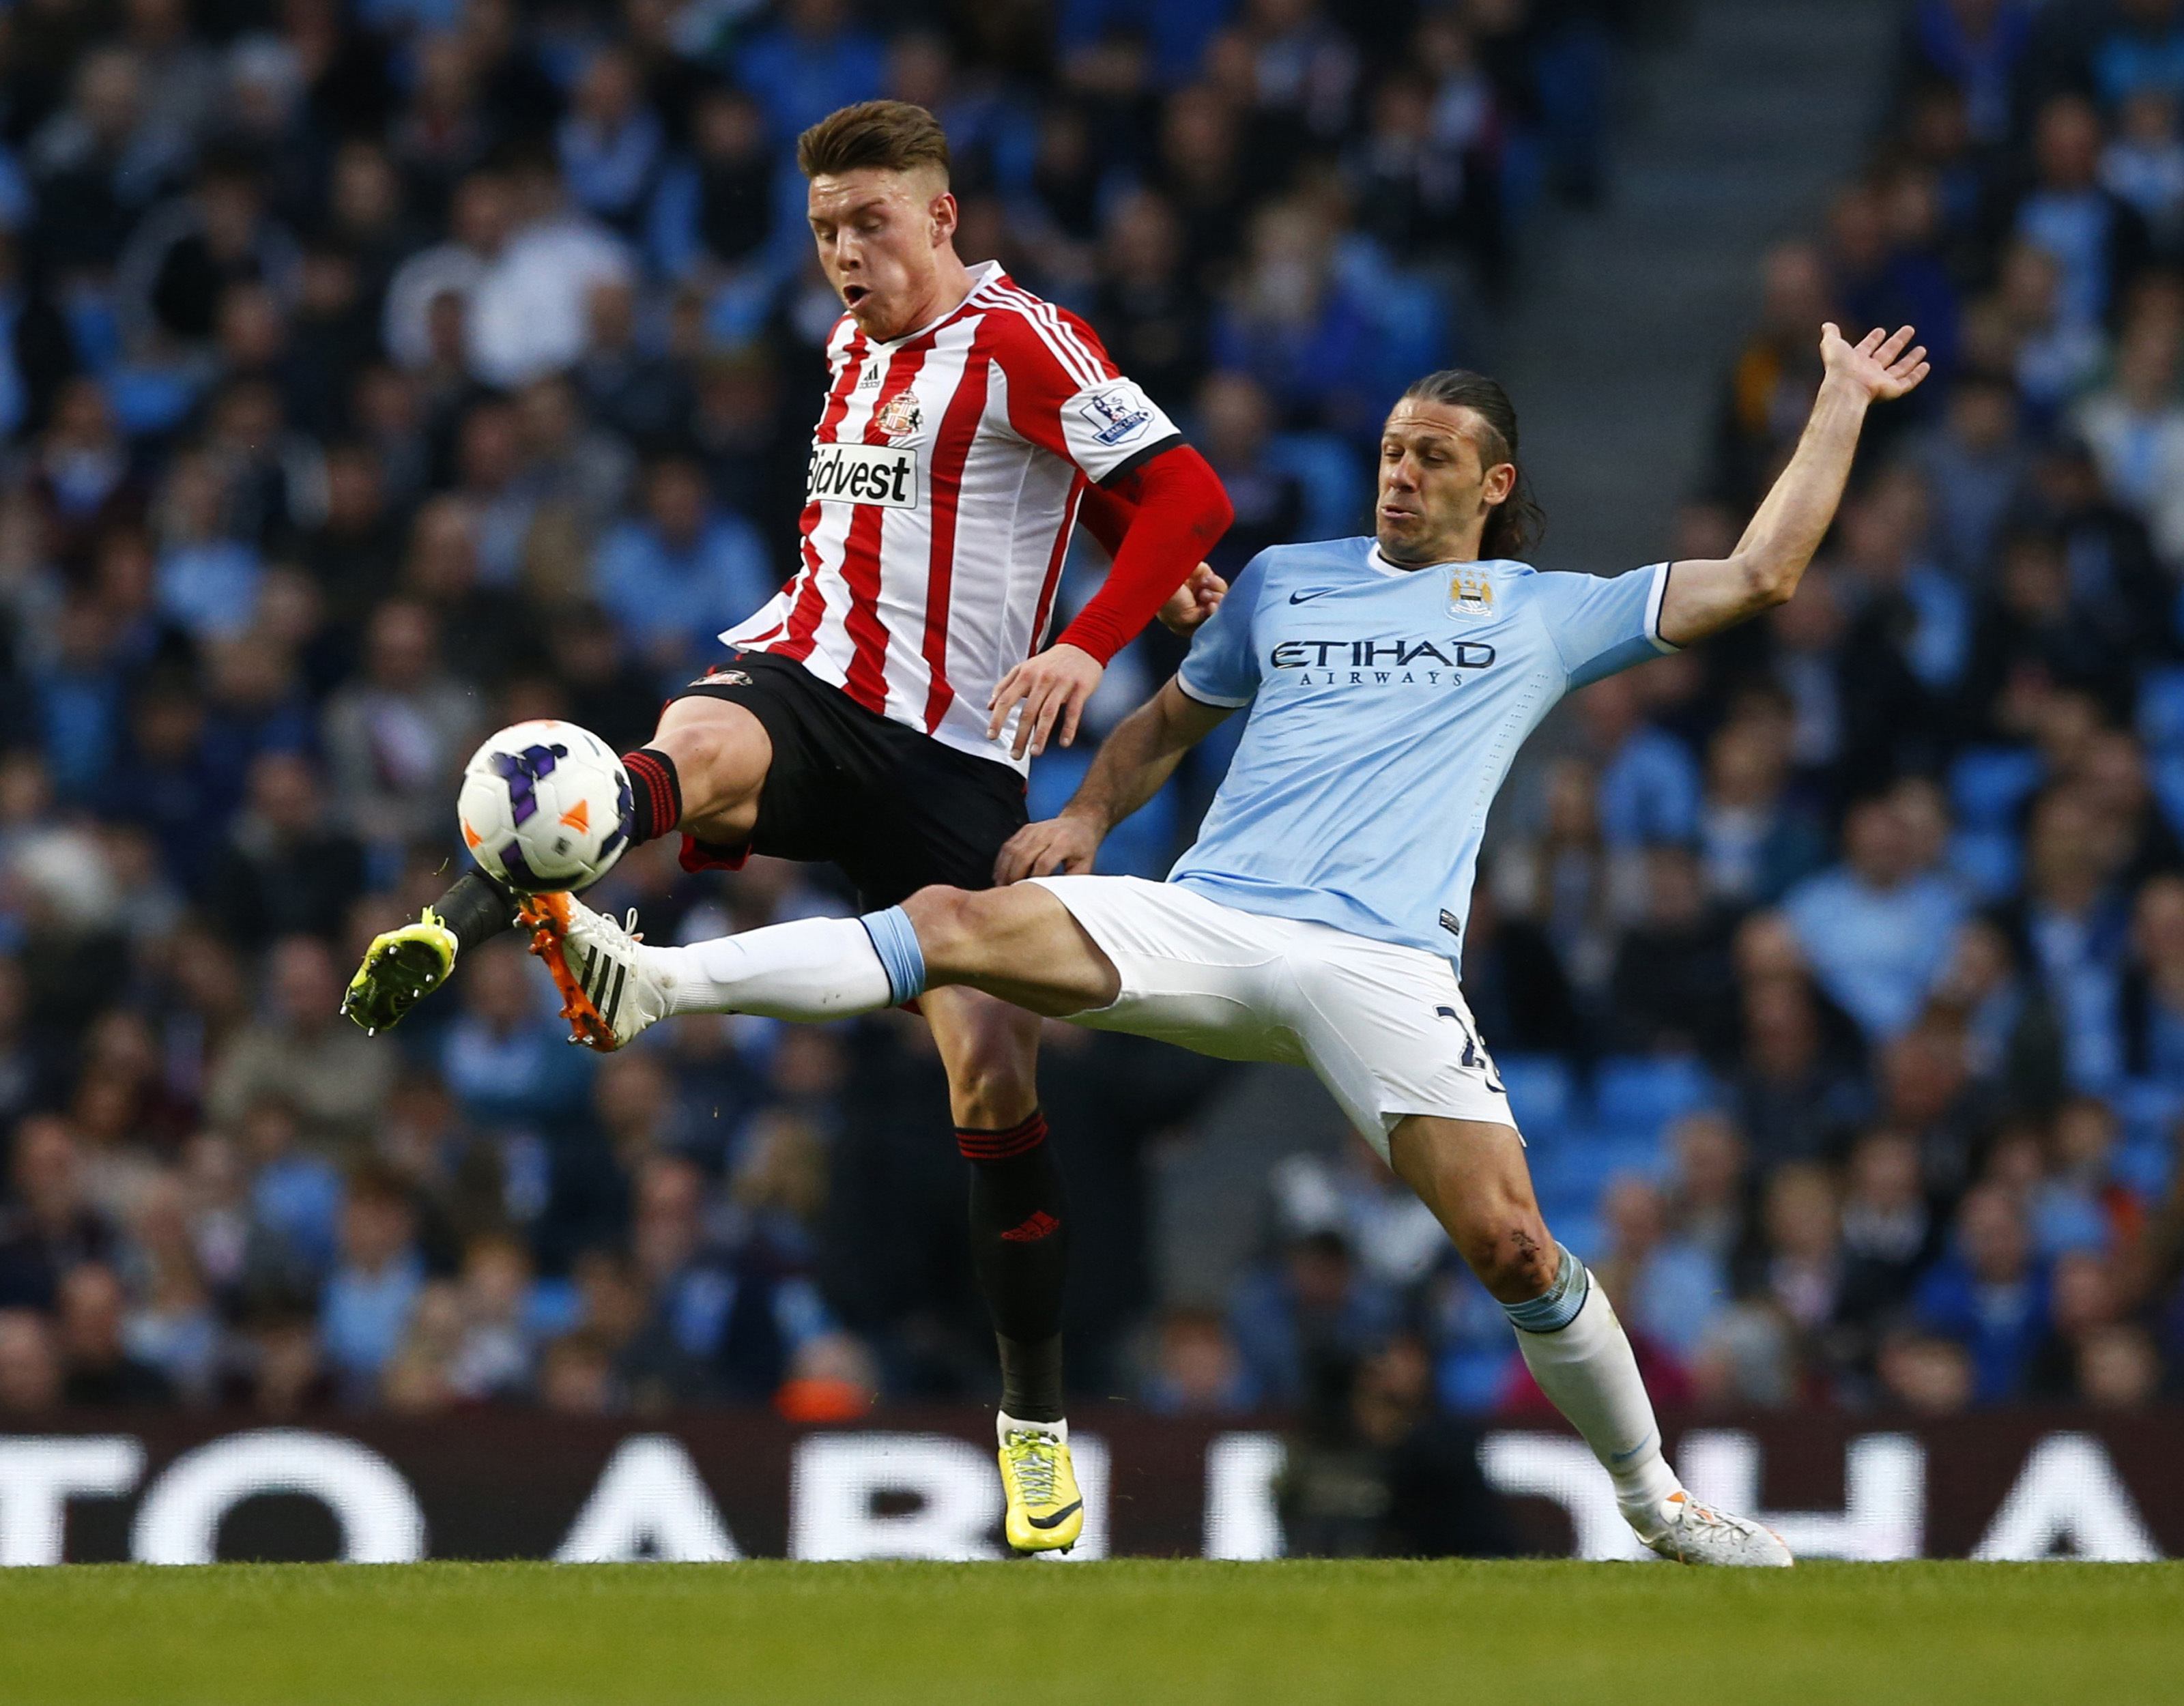 Man City title hopes in tatters after Sunderland draw